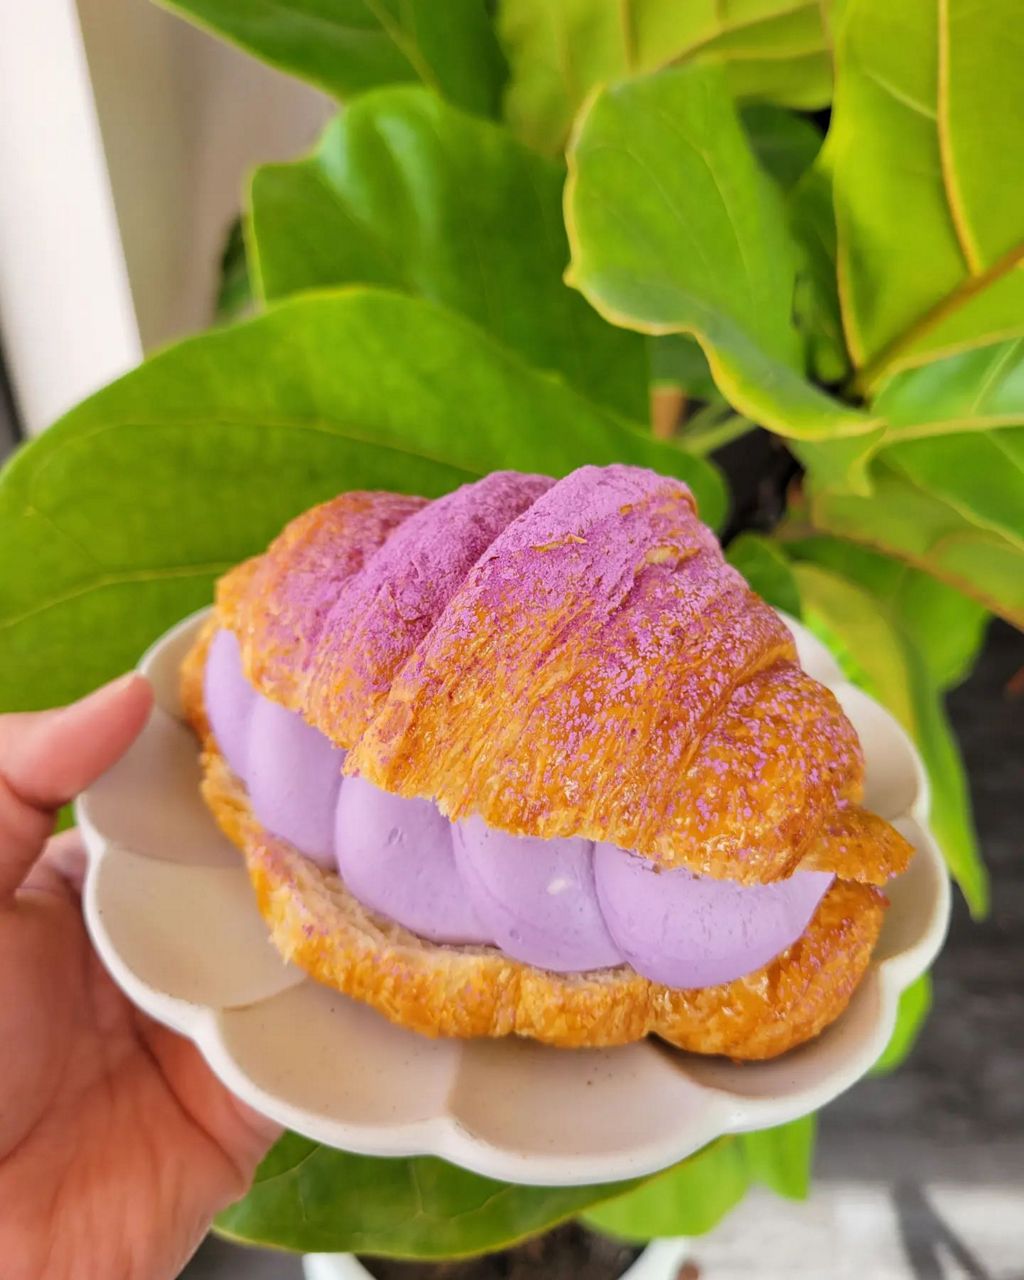 The ube halaya croissant is one of the most popular items at Cafe Mochiko. The eatery has received national praise since opening two years ago. (Photo courtesy of Cafe Mochiko)